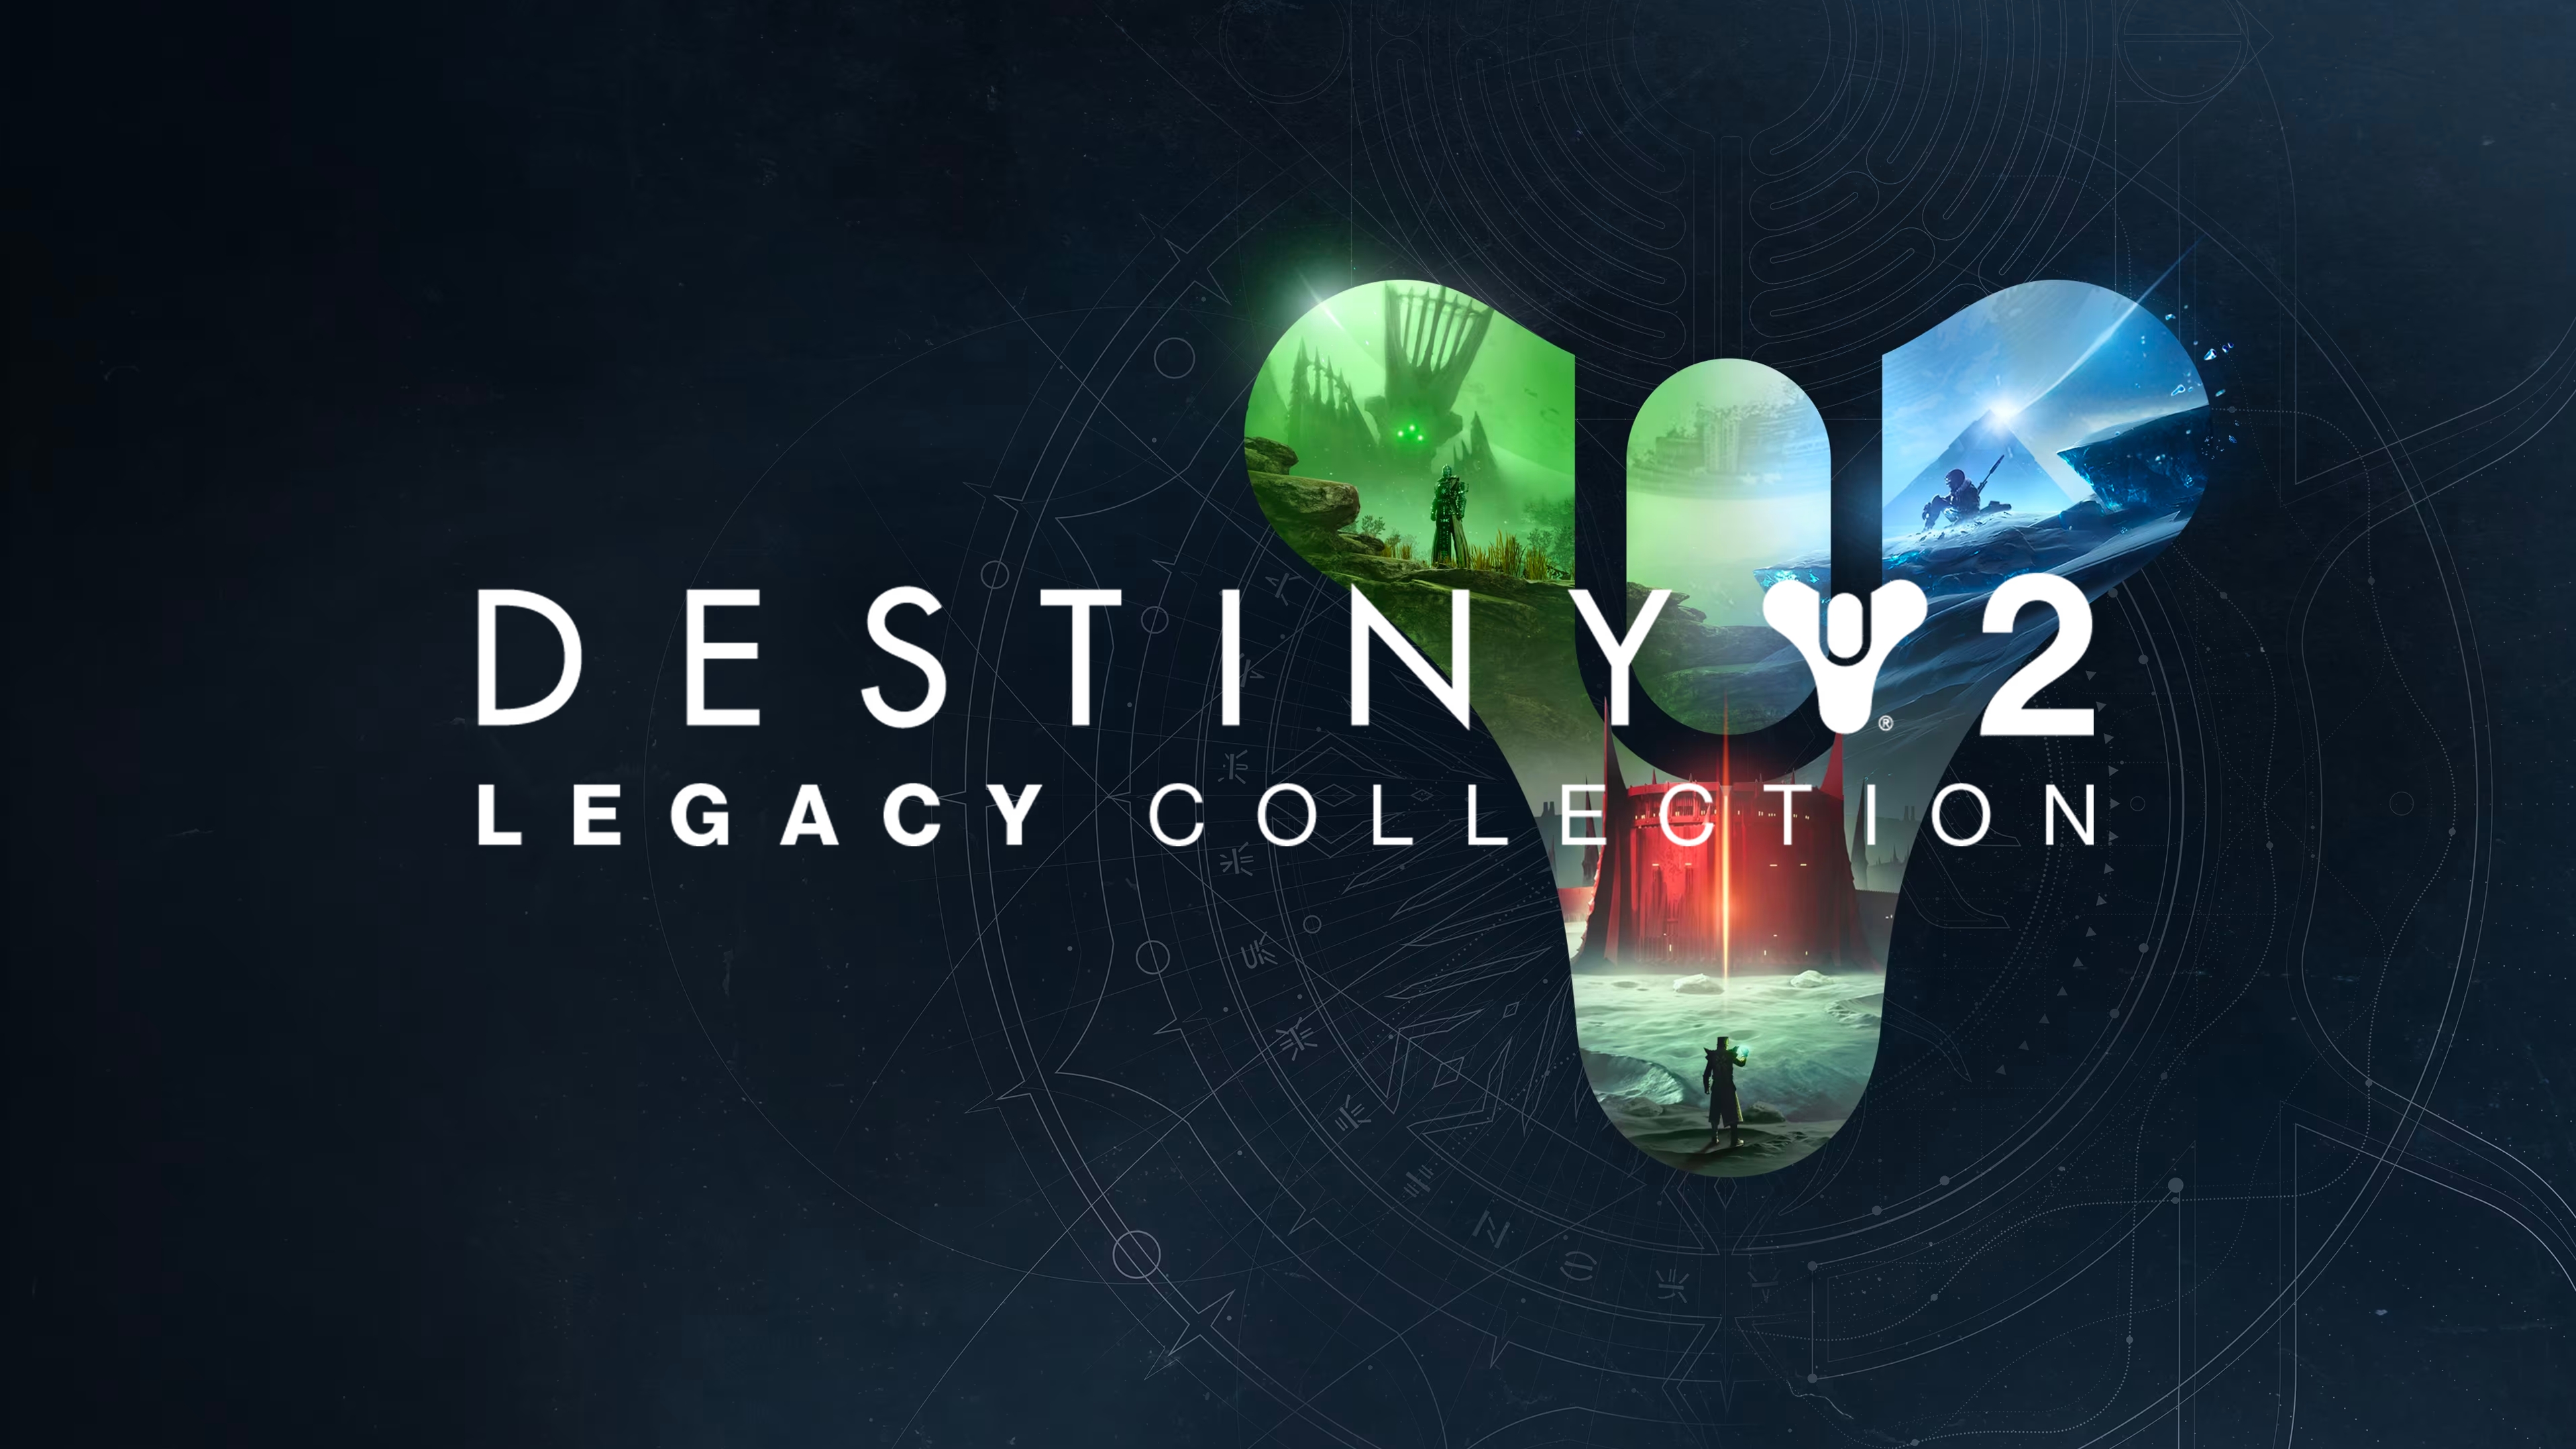 Destiny 2 legacy collection